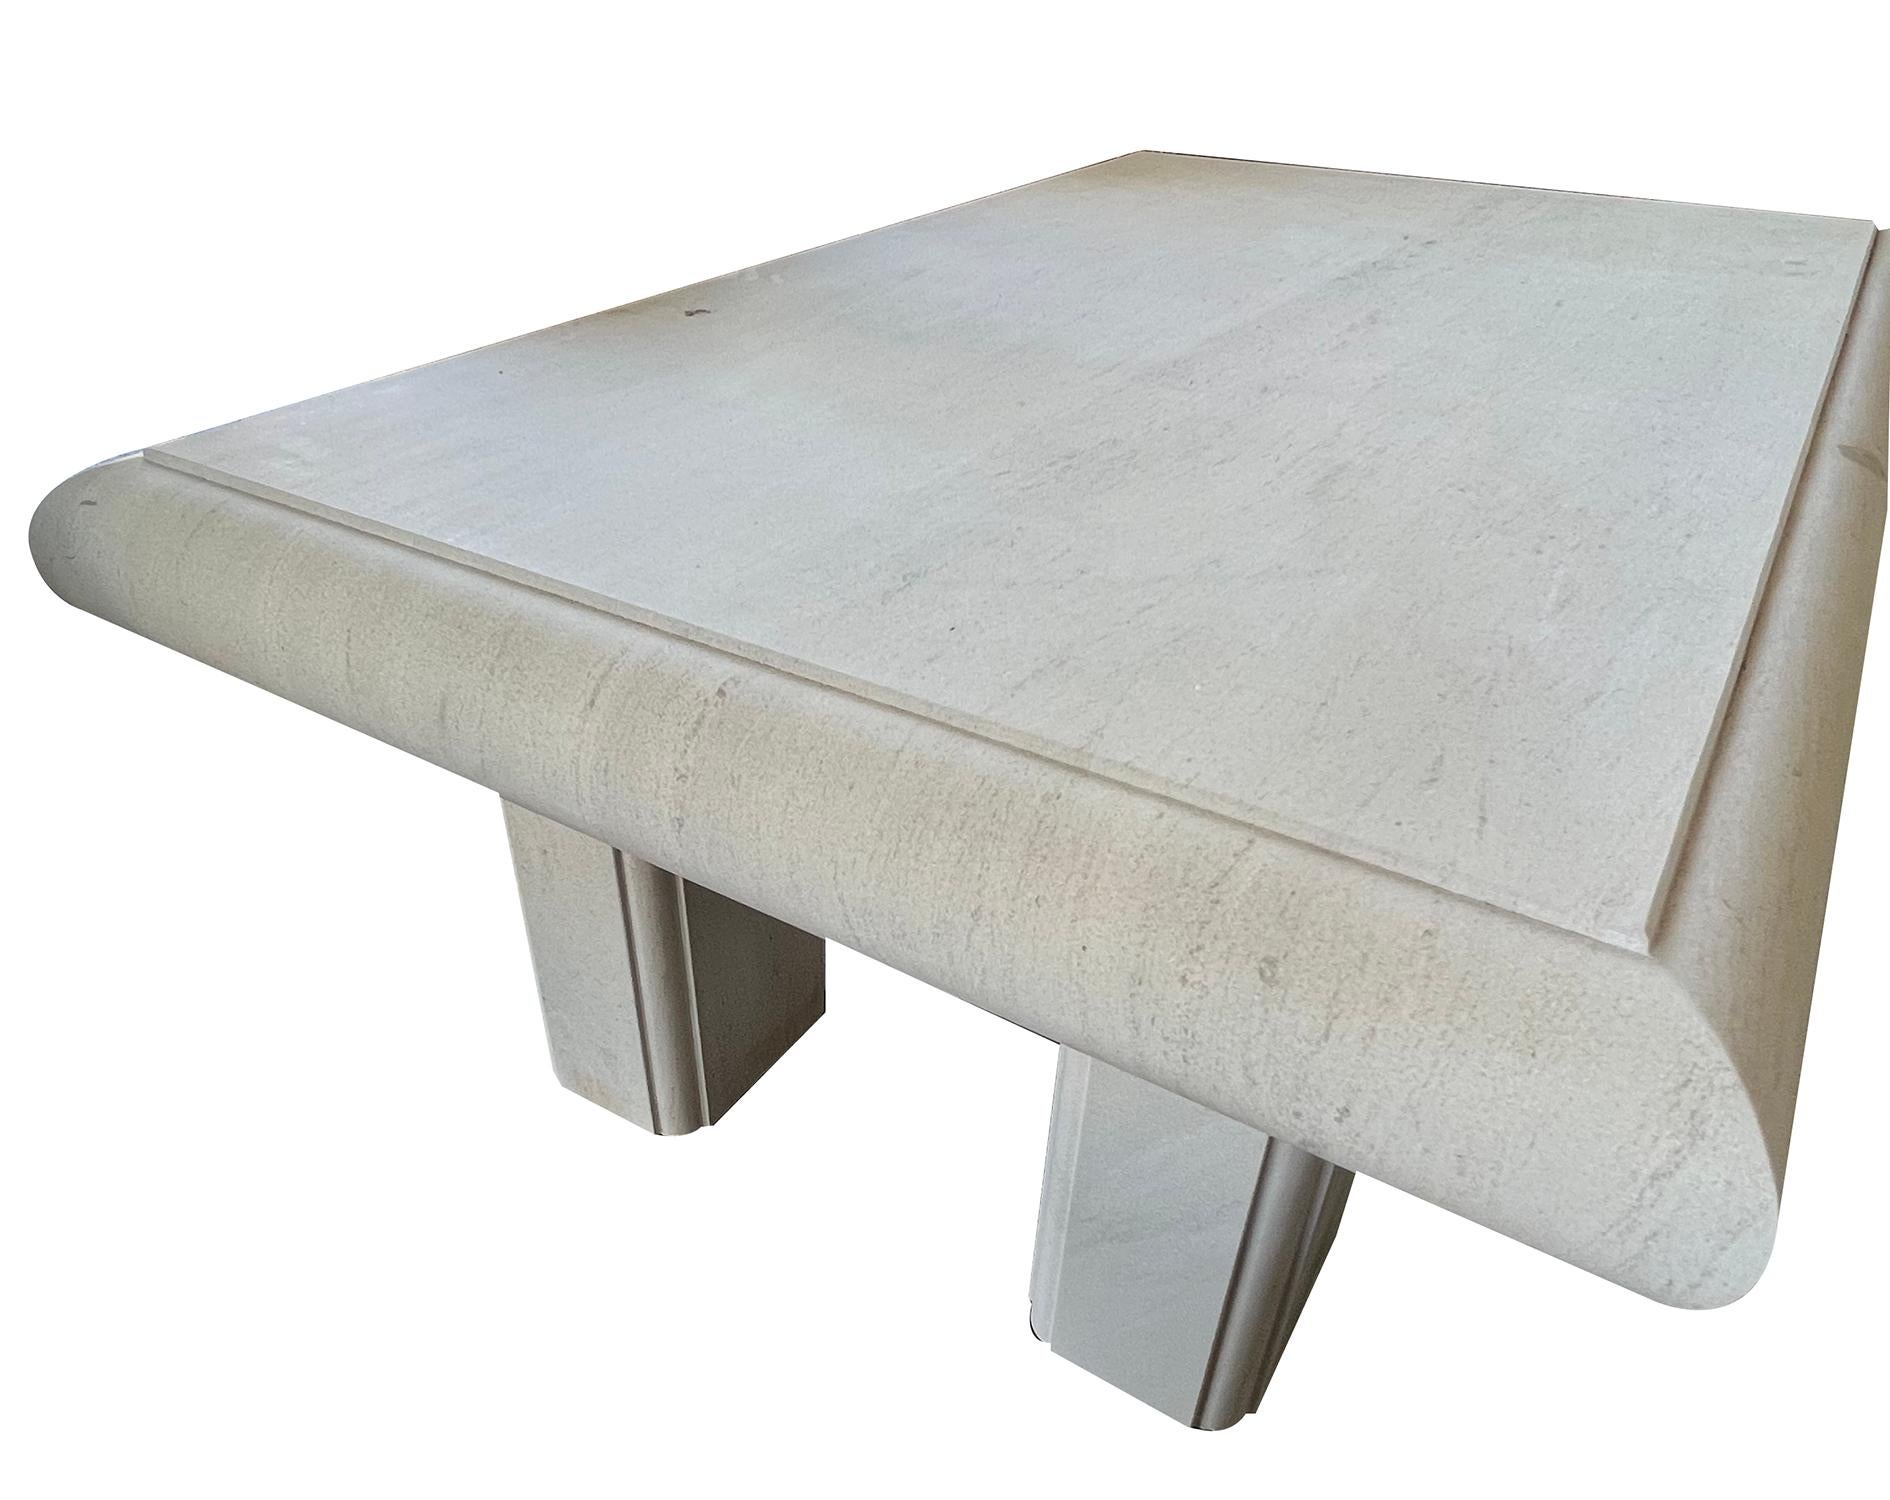 the thick rectangular top with bullnose edge raised on 4 detached rectilinear supports; tables are custom made in Belgium so variations in stone will occur